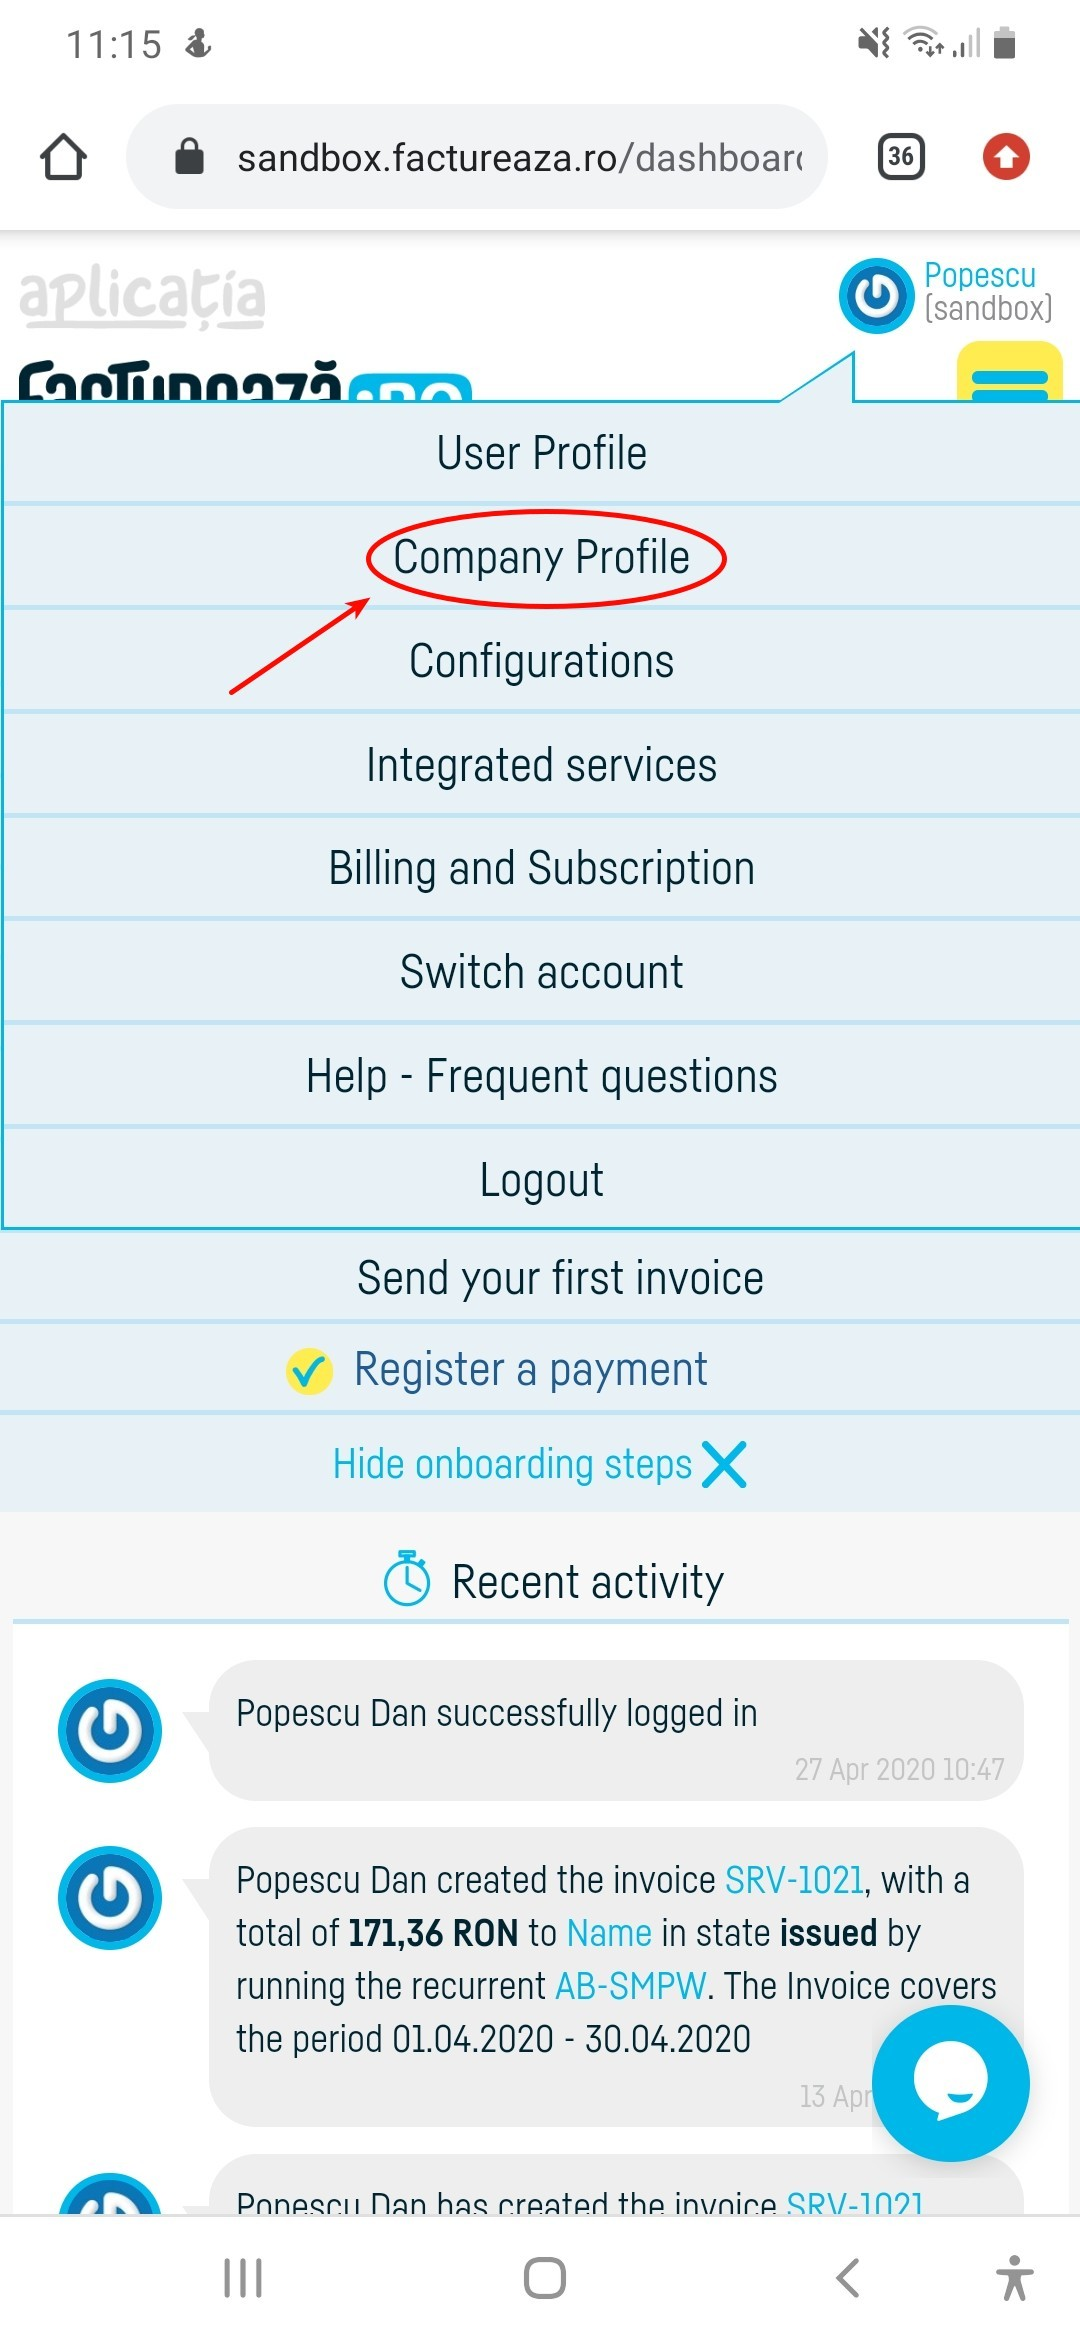 How do I switch to a free subscription? - pasul 1